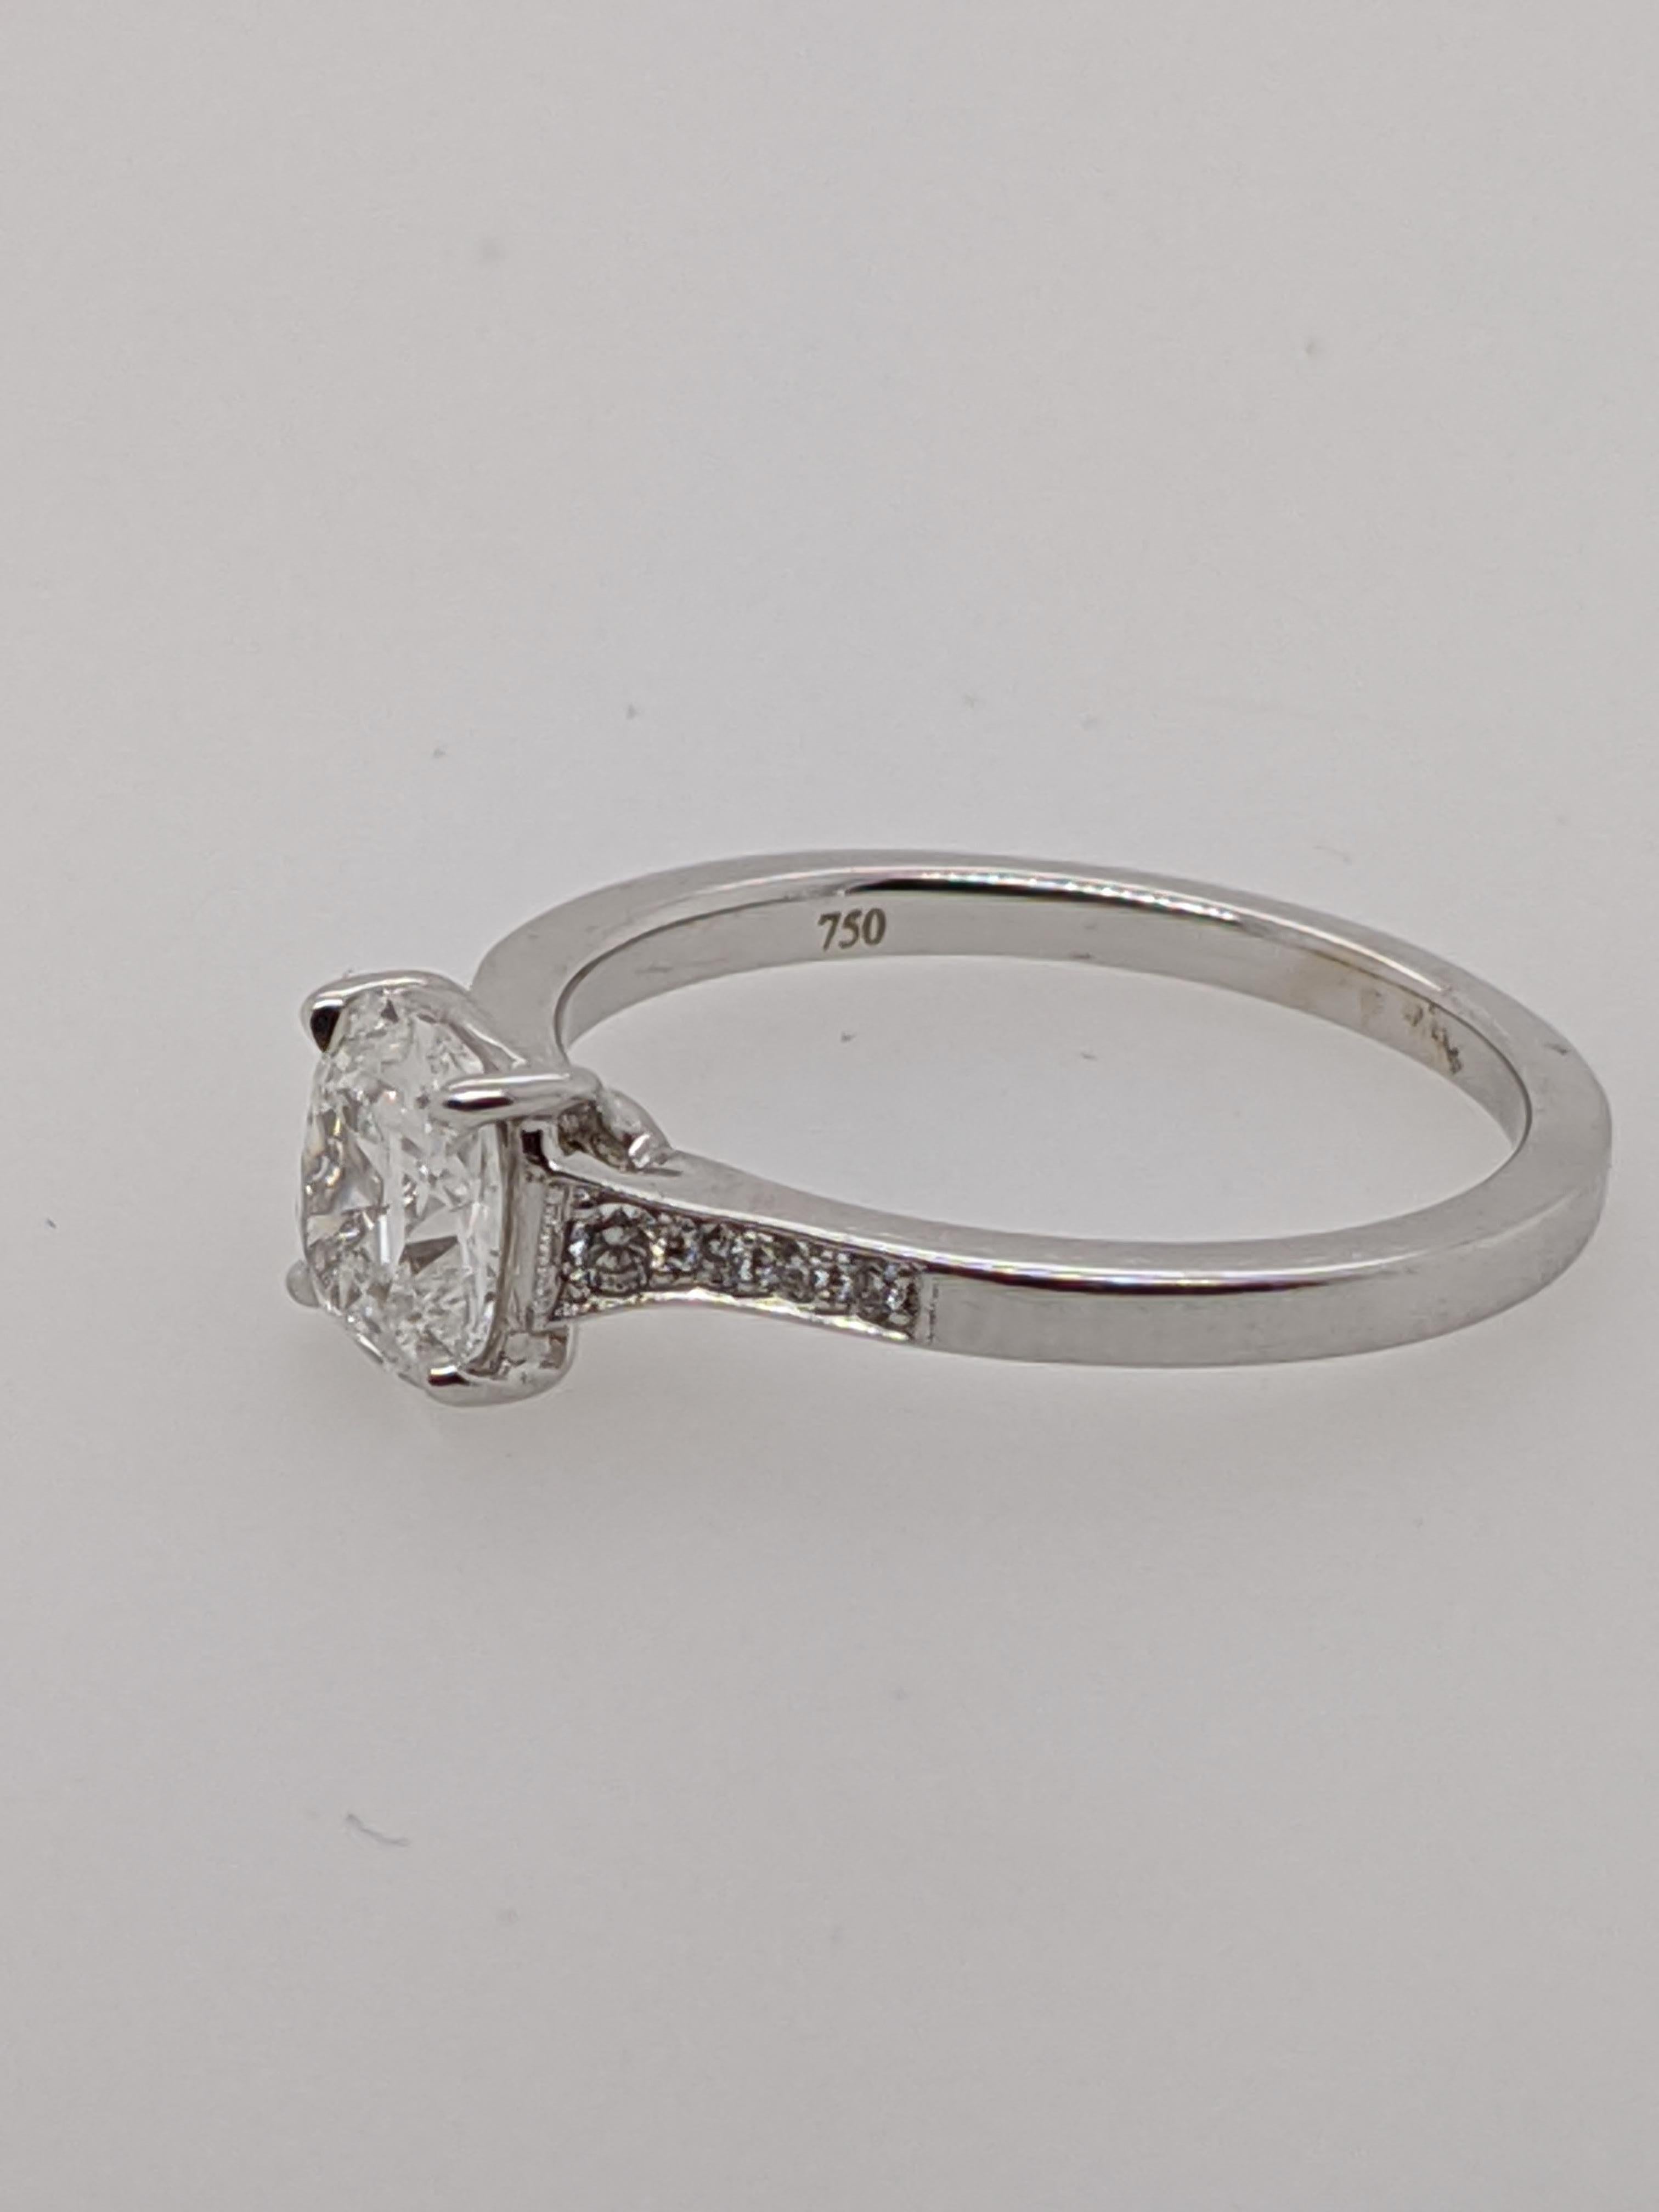 Classic 18 karat white gold vintage style ring handmade in the United States.  Featuring a .90 carat E, SI2  clarity antique style cushion with GIA grading report number 1172473450.

This listing has one of hundreds of cushion cut diamonds in our